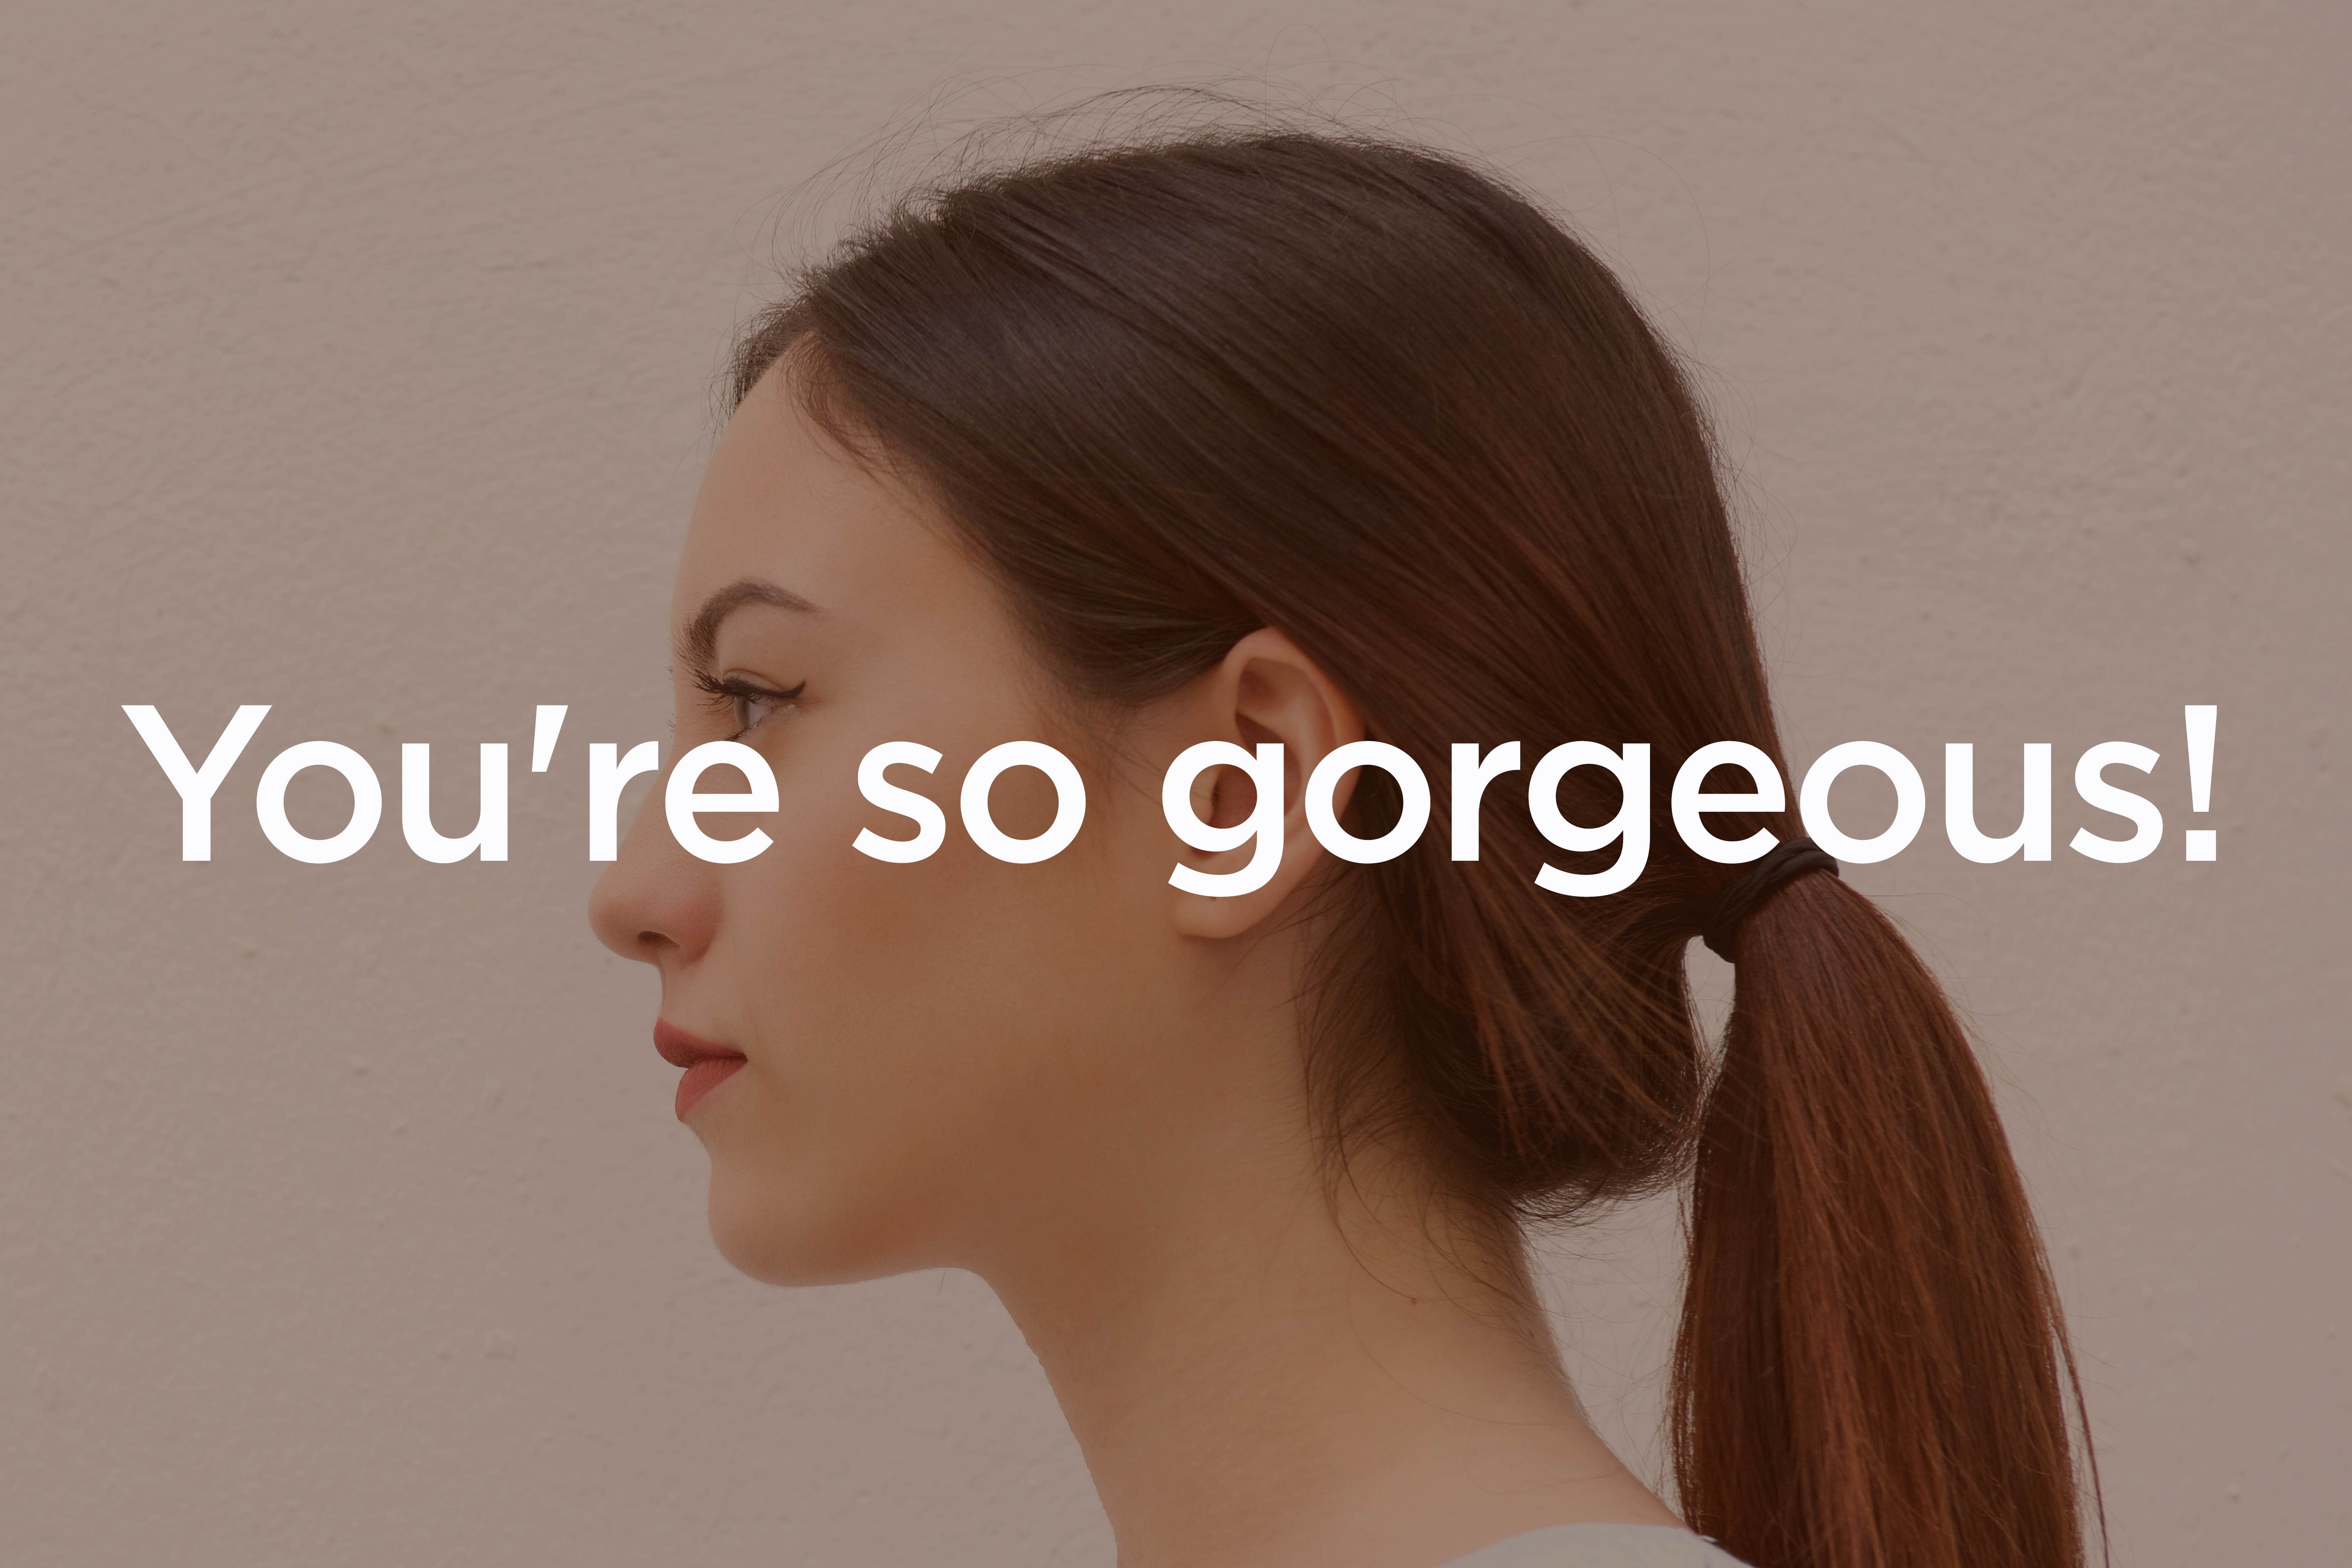 Compliments That Are Actually Insults | Reader's Digest